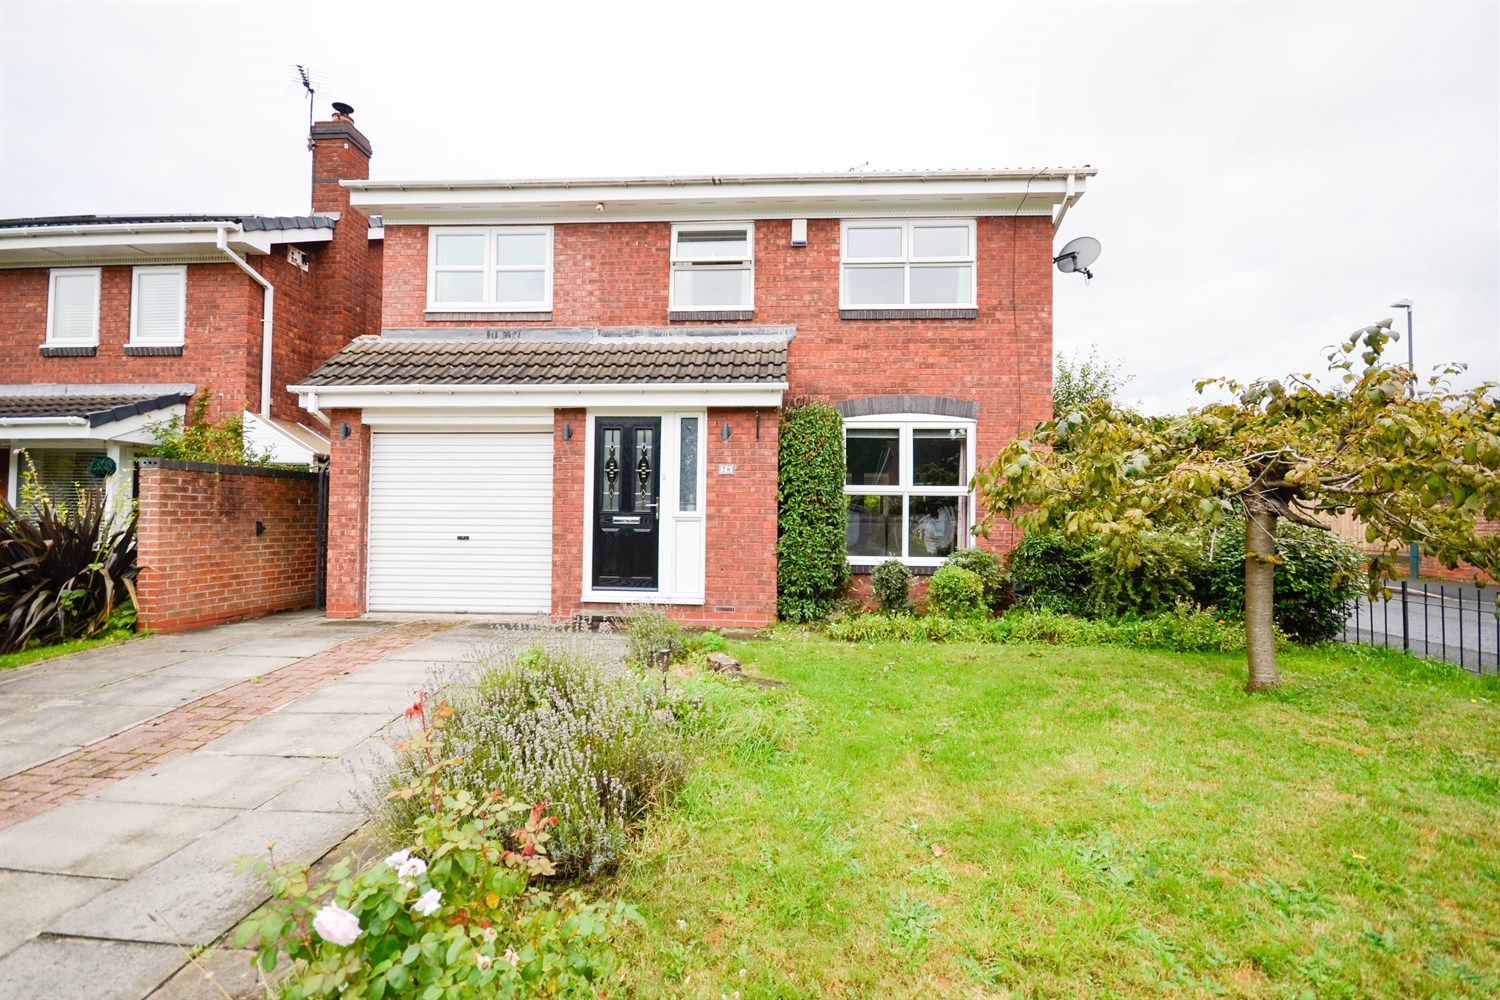 5 bed detached house for sale in Marina View, Hebburn - Property Image 1